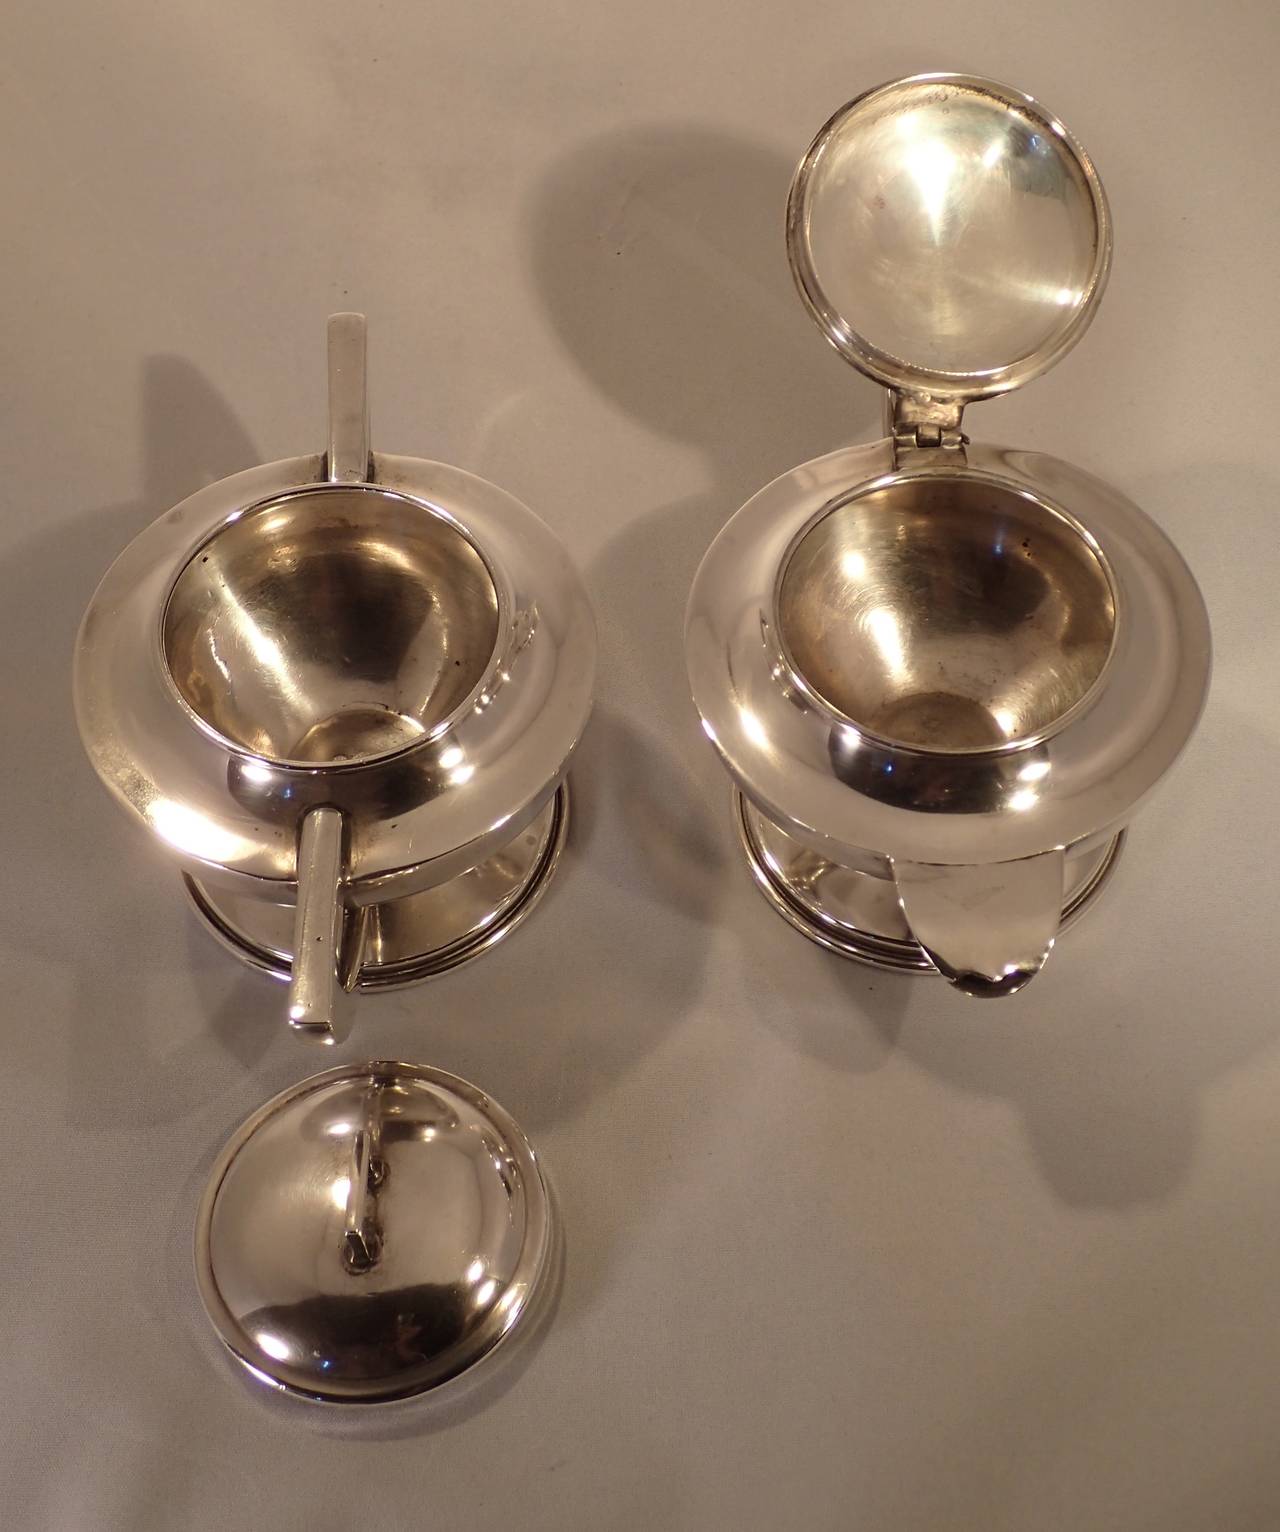 Metalwork Deco Inspired 1950s Hector Aguilar Silver Cream and Sugar Service For Sale